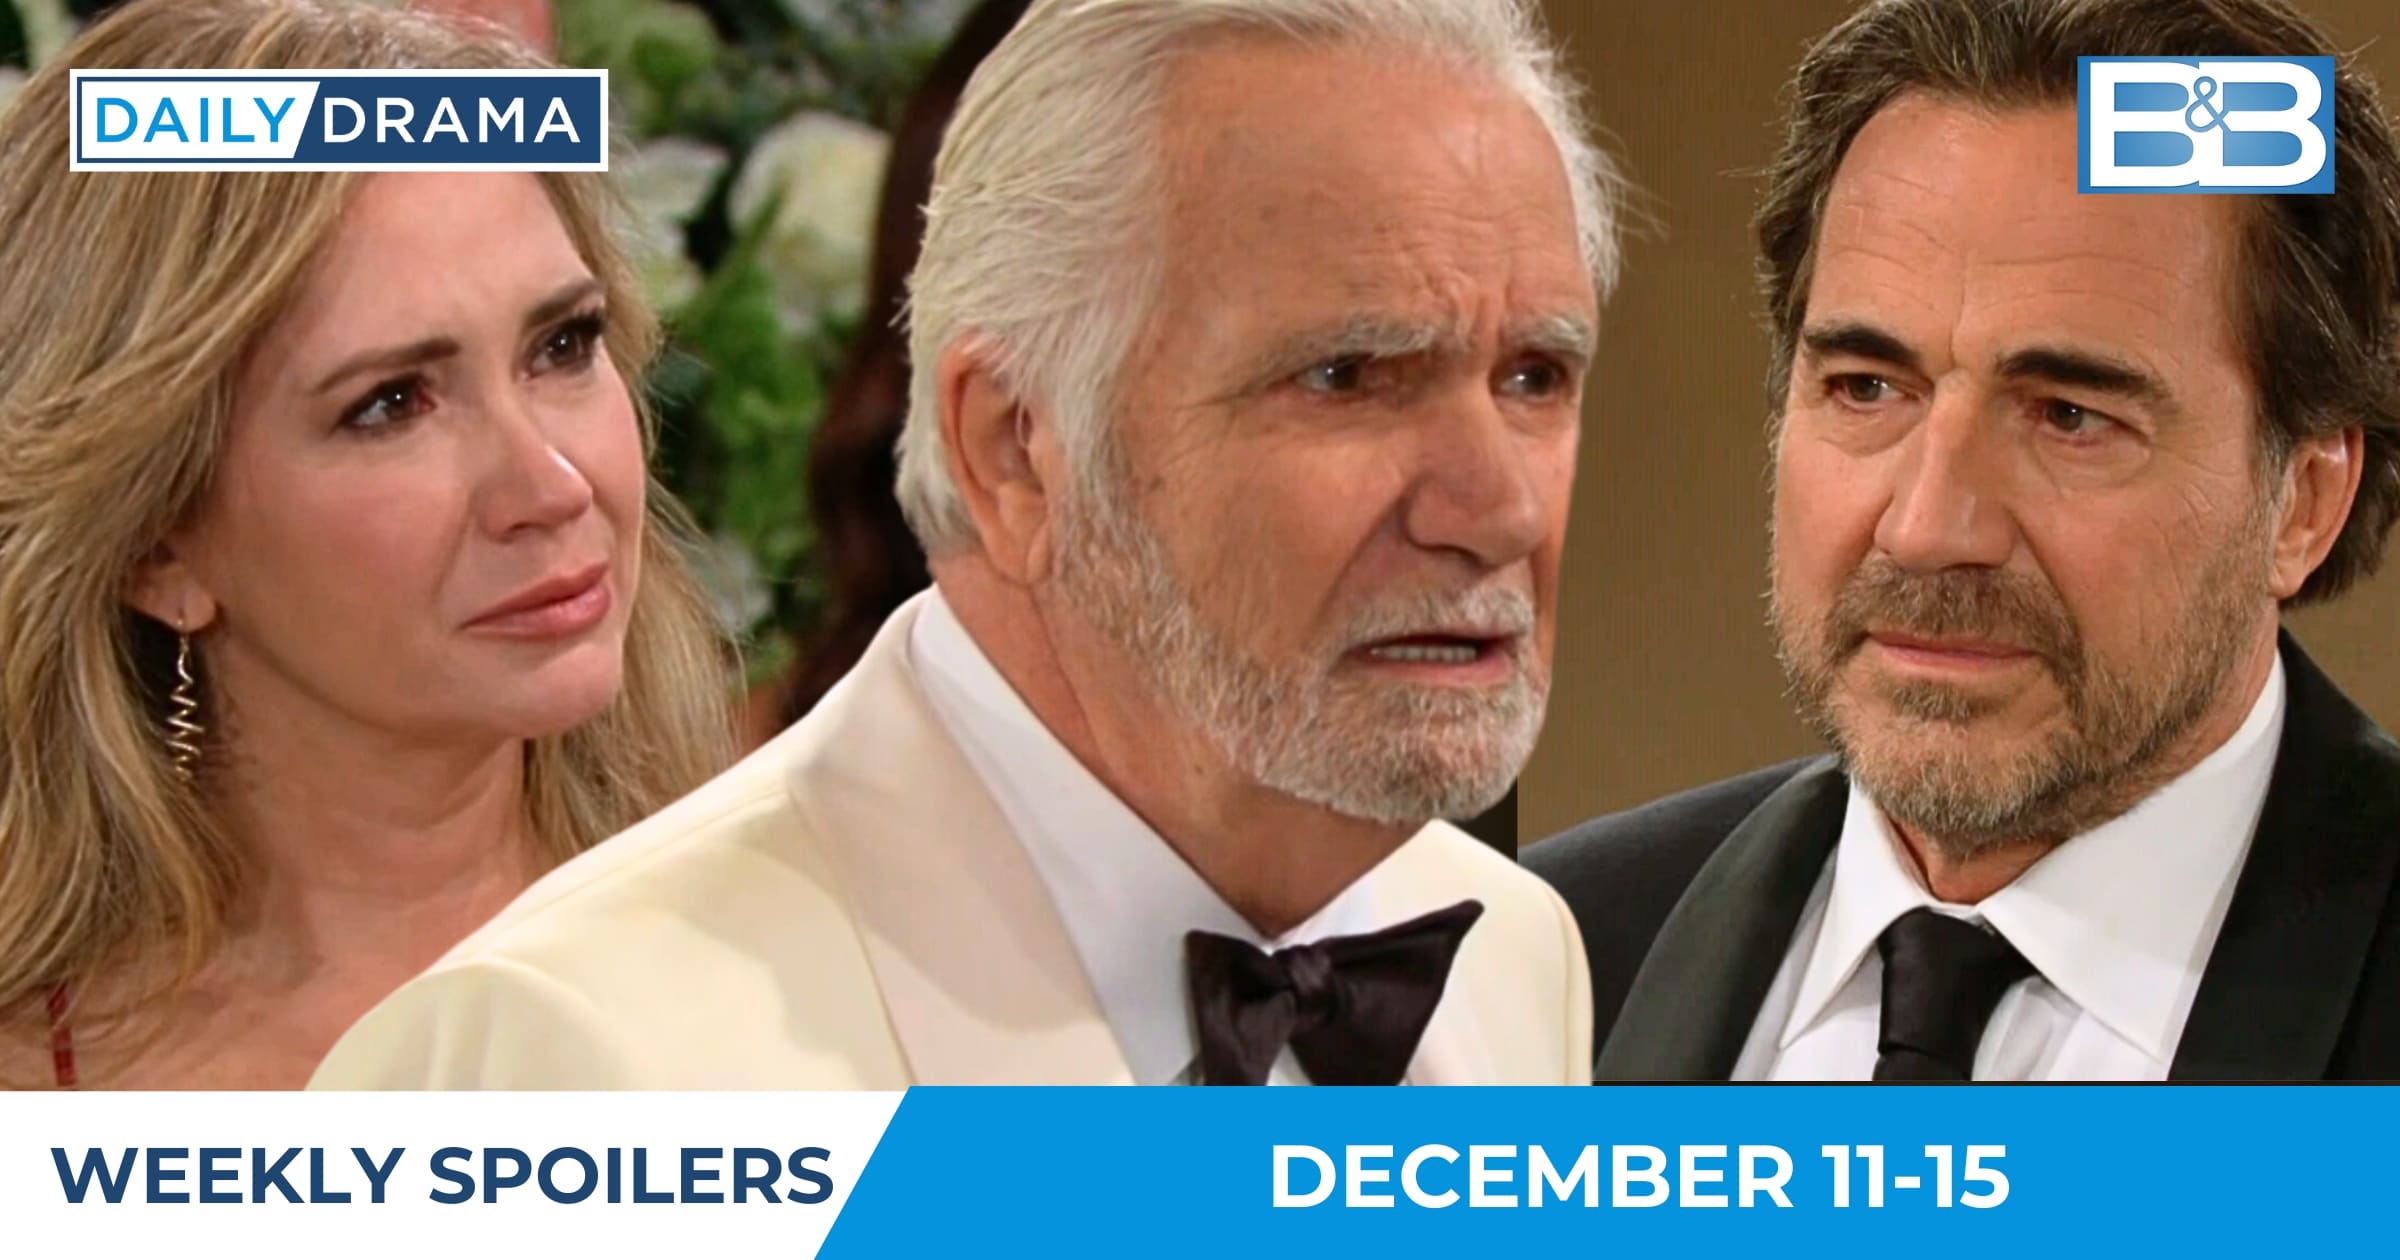 The Bold and the Beautiful Weekly Spoilers - Dec 11-15 - Bridget Eric and Ridge